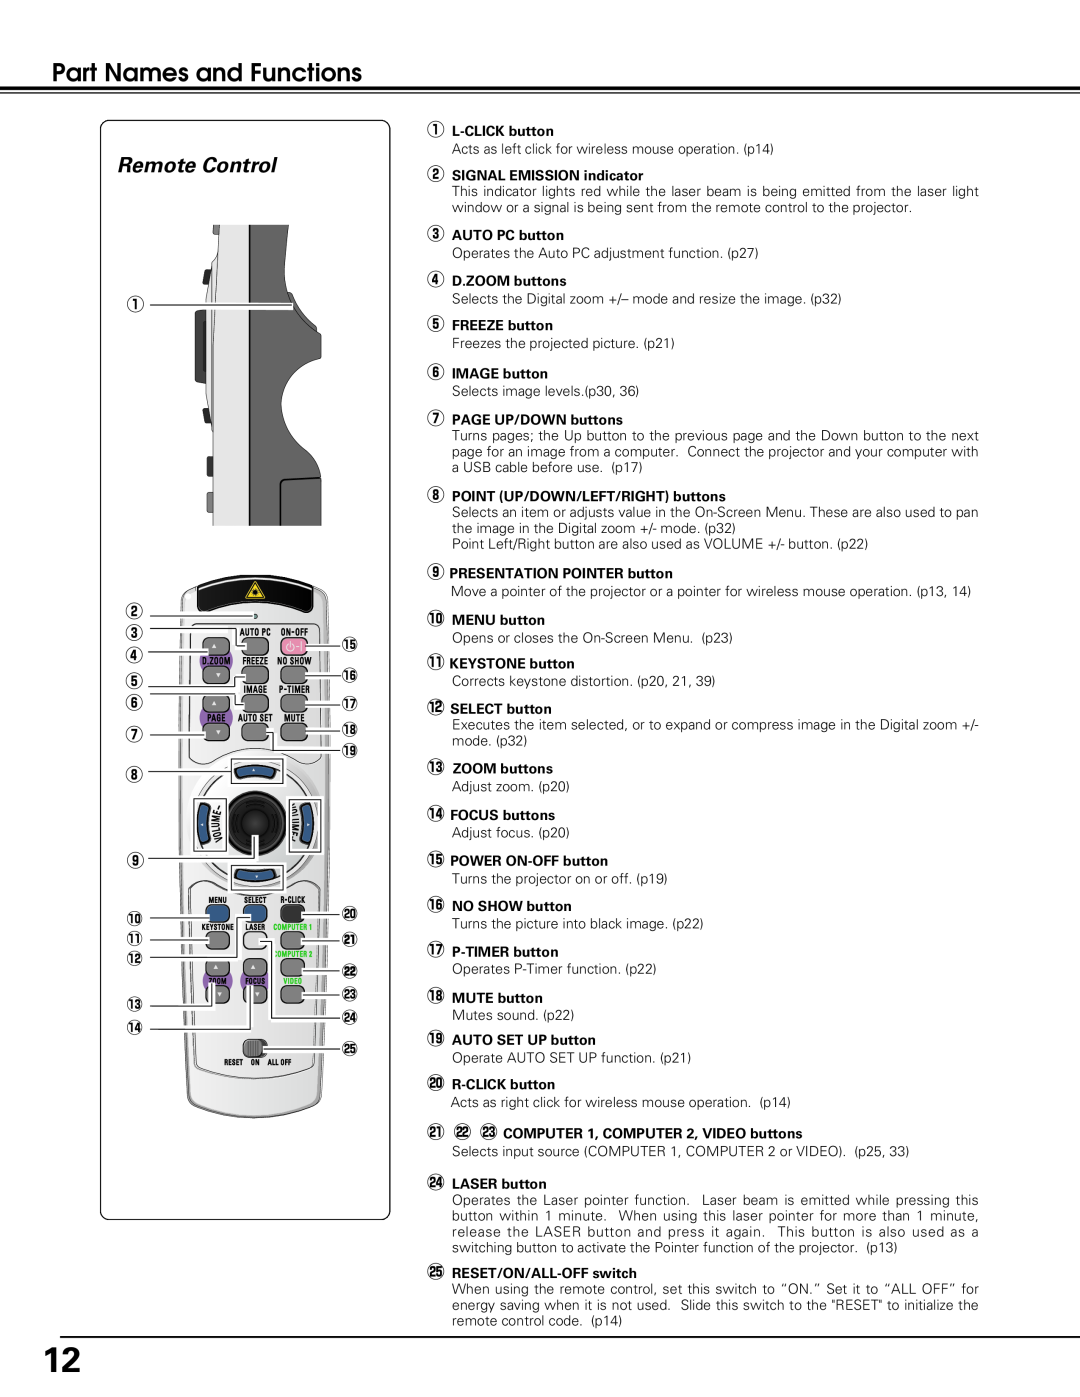 Eiki LC-XE10 instruction manual Remote Control, Part Names and Functions 